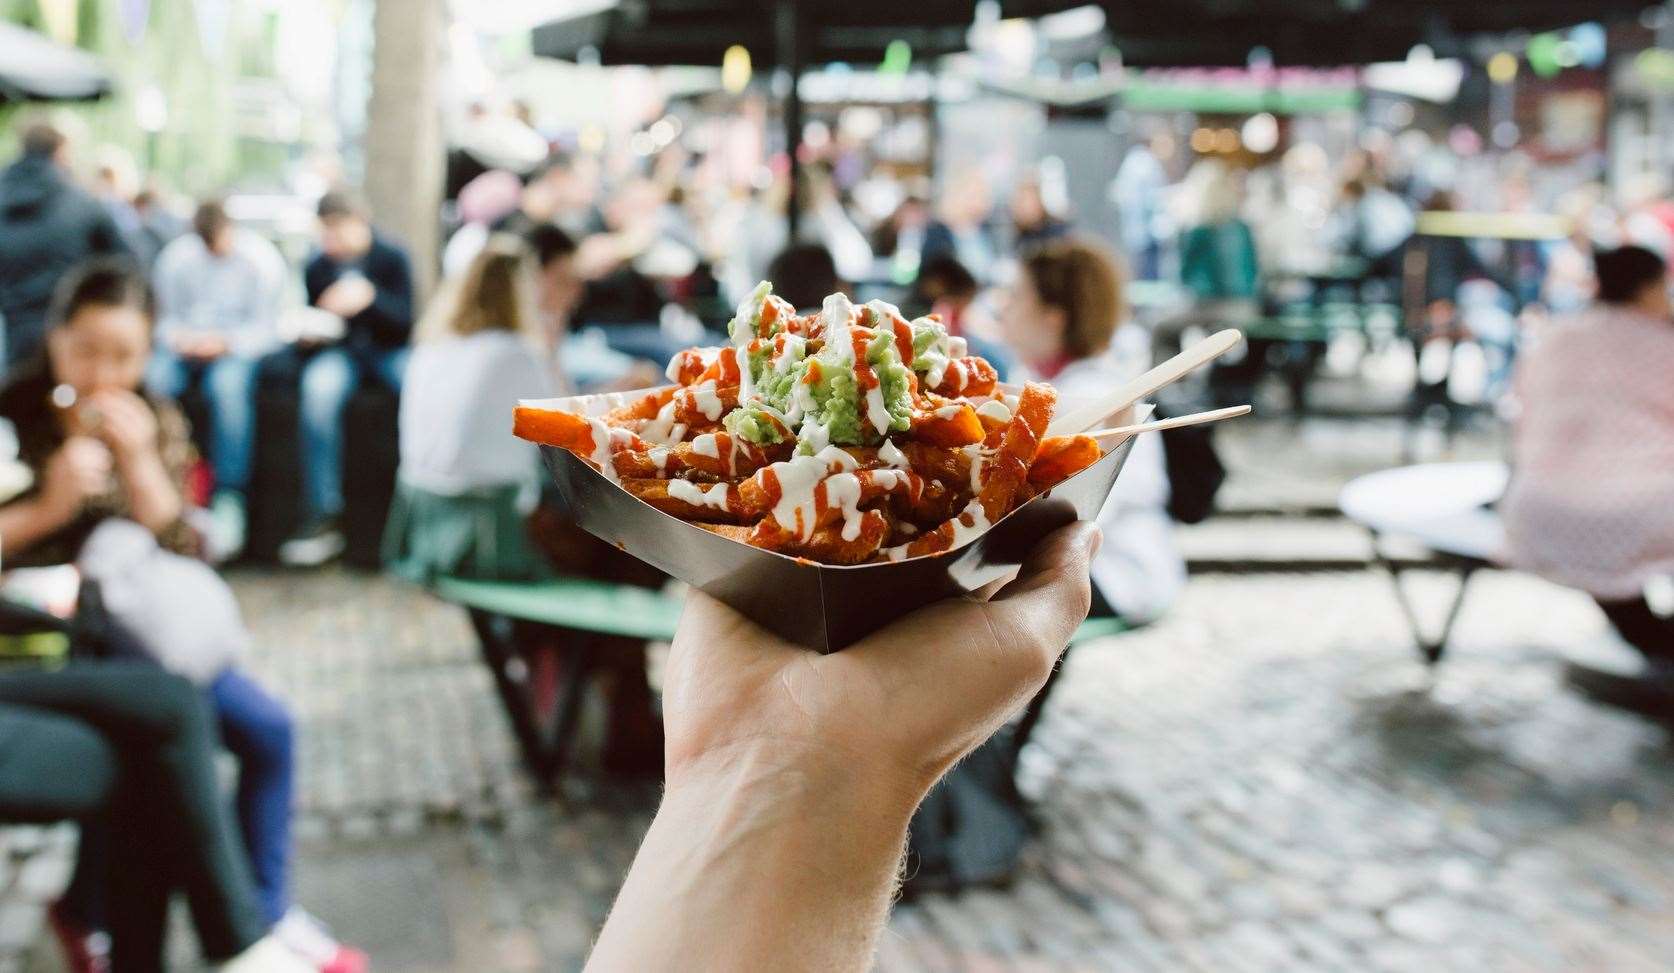 Street food has become a popular trend in the hospitality industry. Picture: iStock